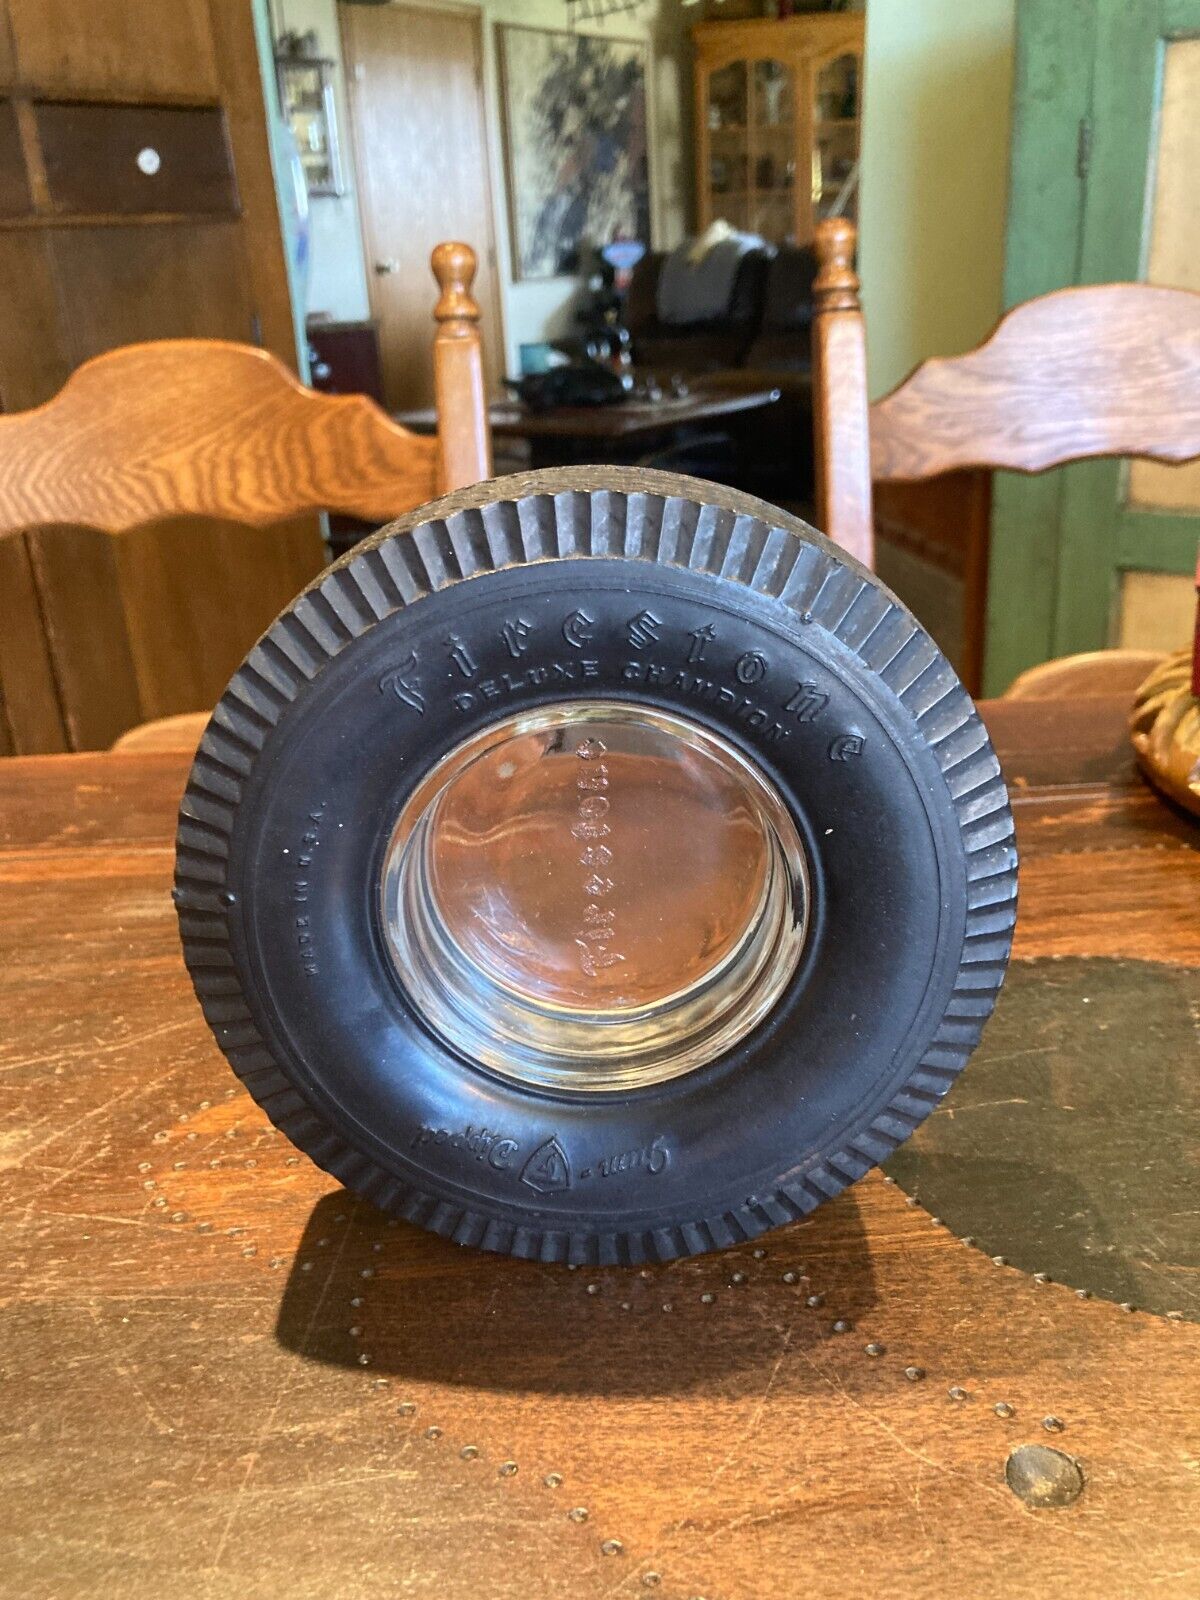 A VERY NICE FIRESTONE DELUXE CHAMPION TIRE ASH TRAY